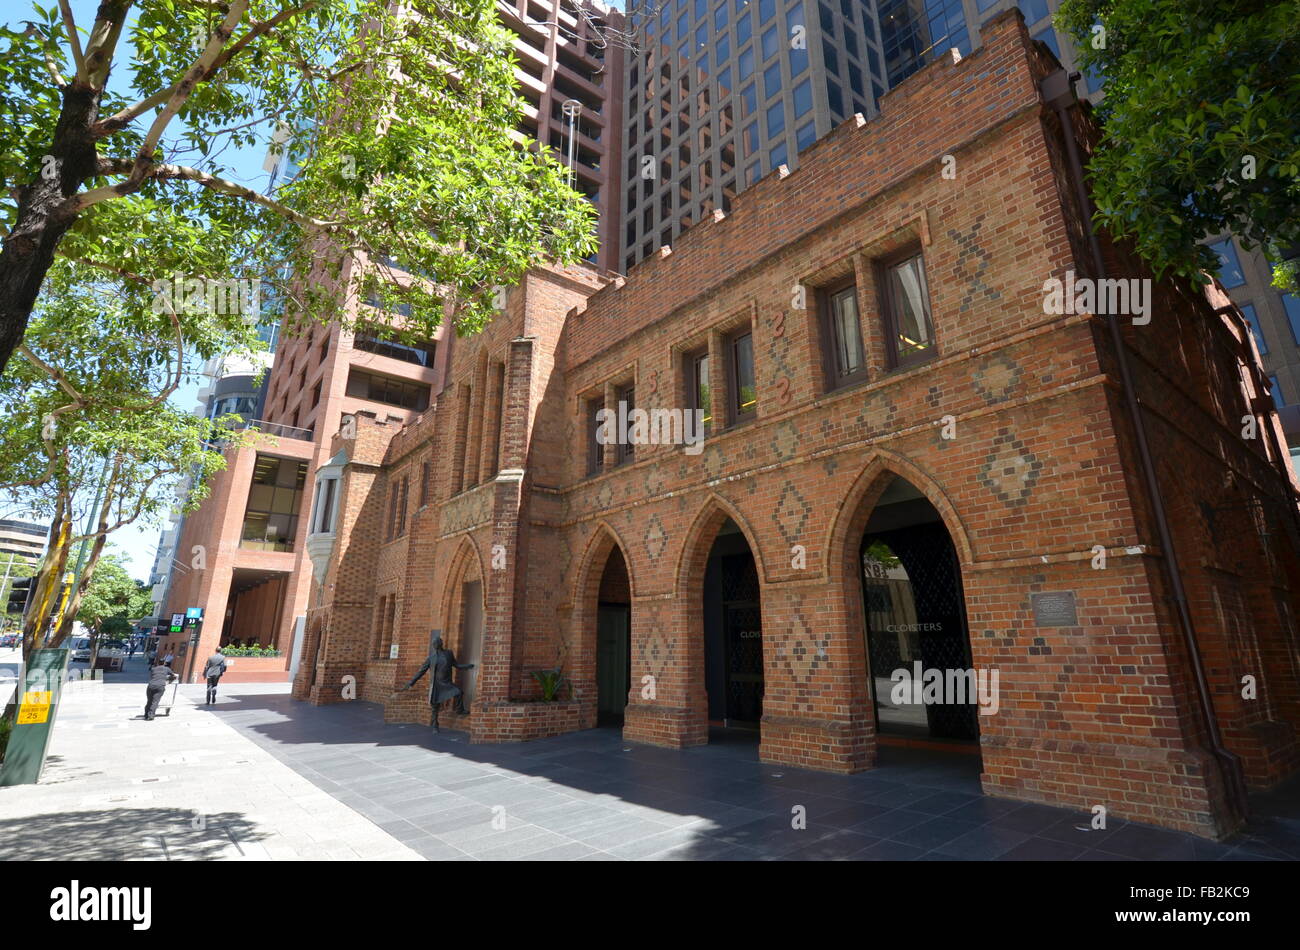 The Cloisters, a convict-built colonial era building in Perth, Australia Stock Photo